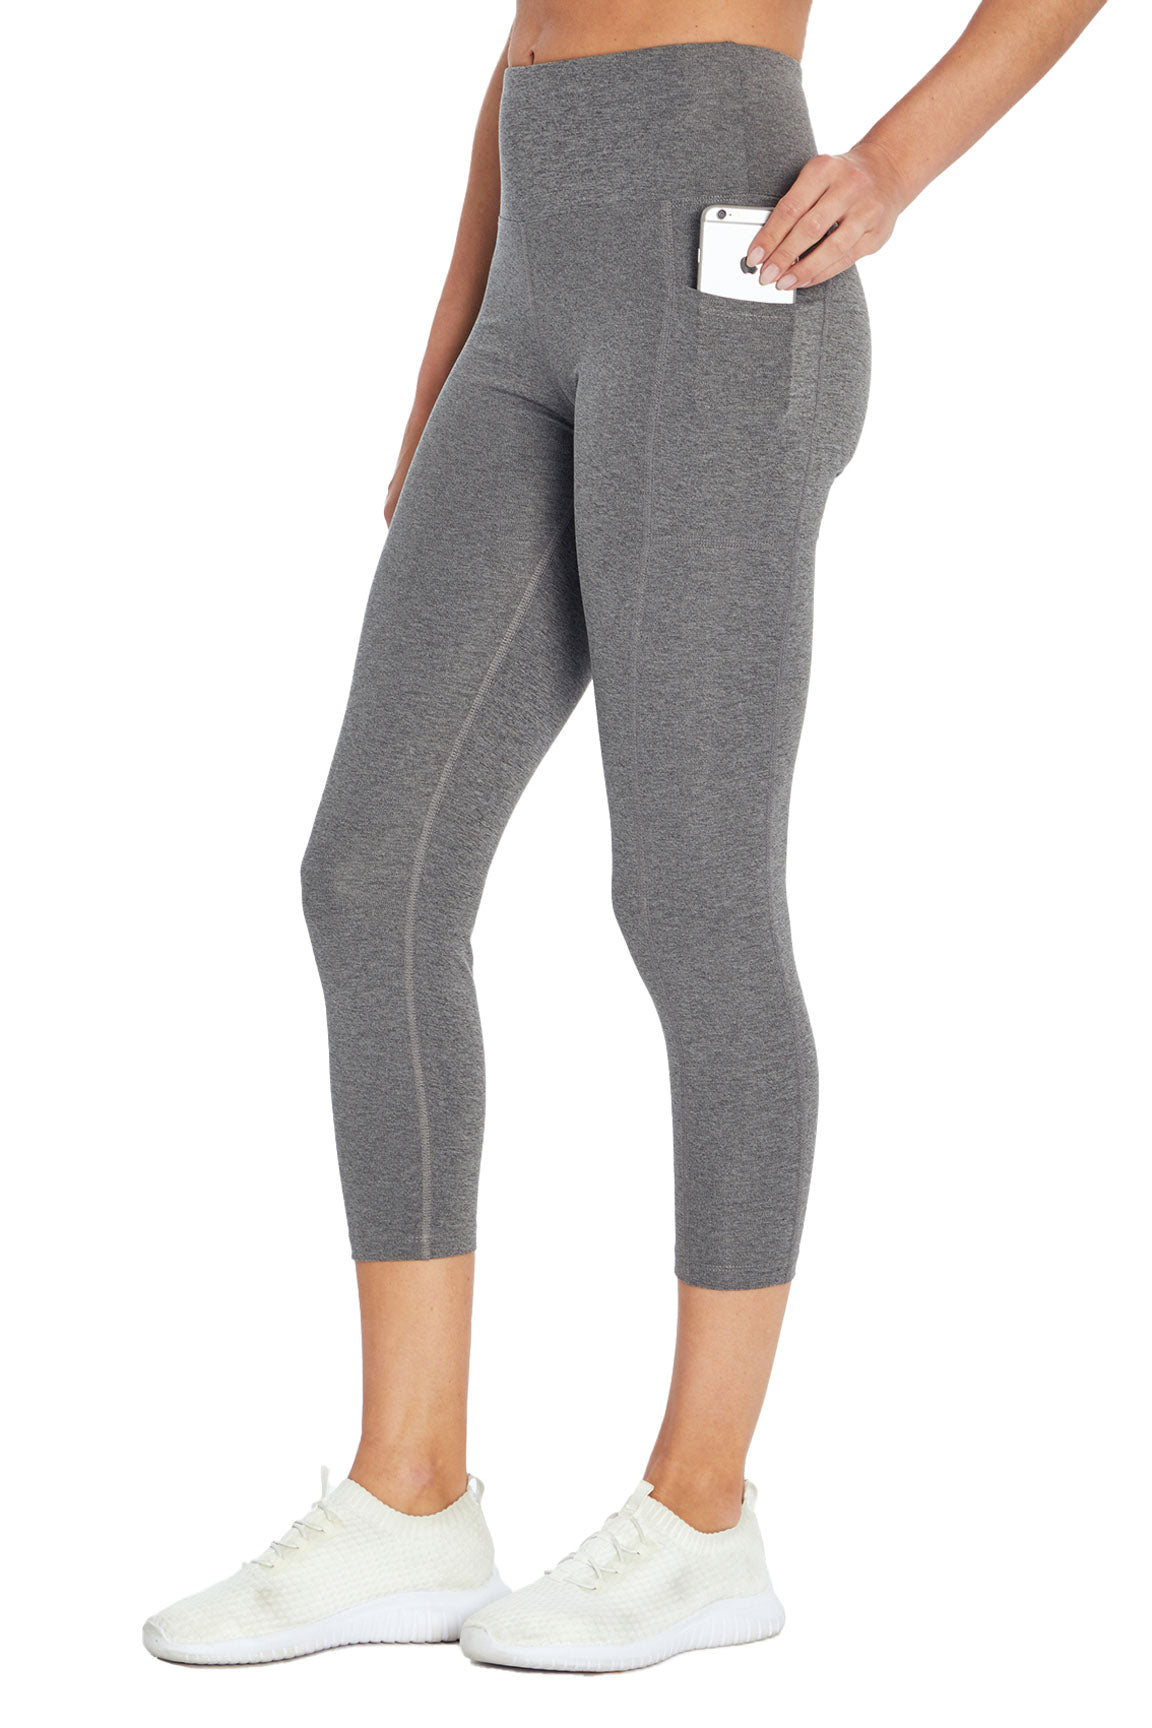 Bally Total Fitness Bright Pink Bally Yoga Leggings - $13 (50% Off